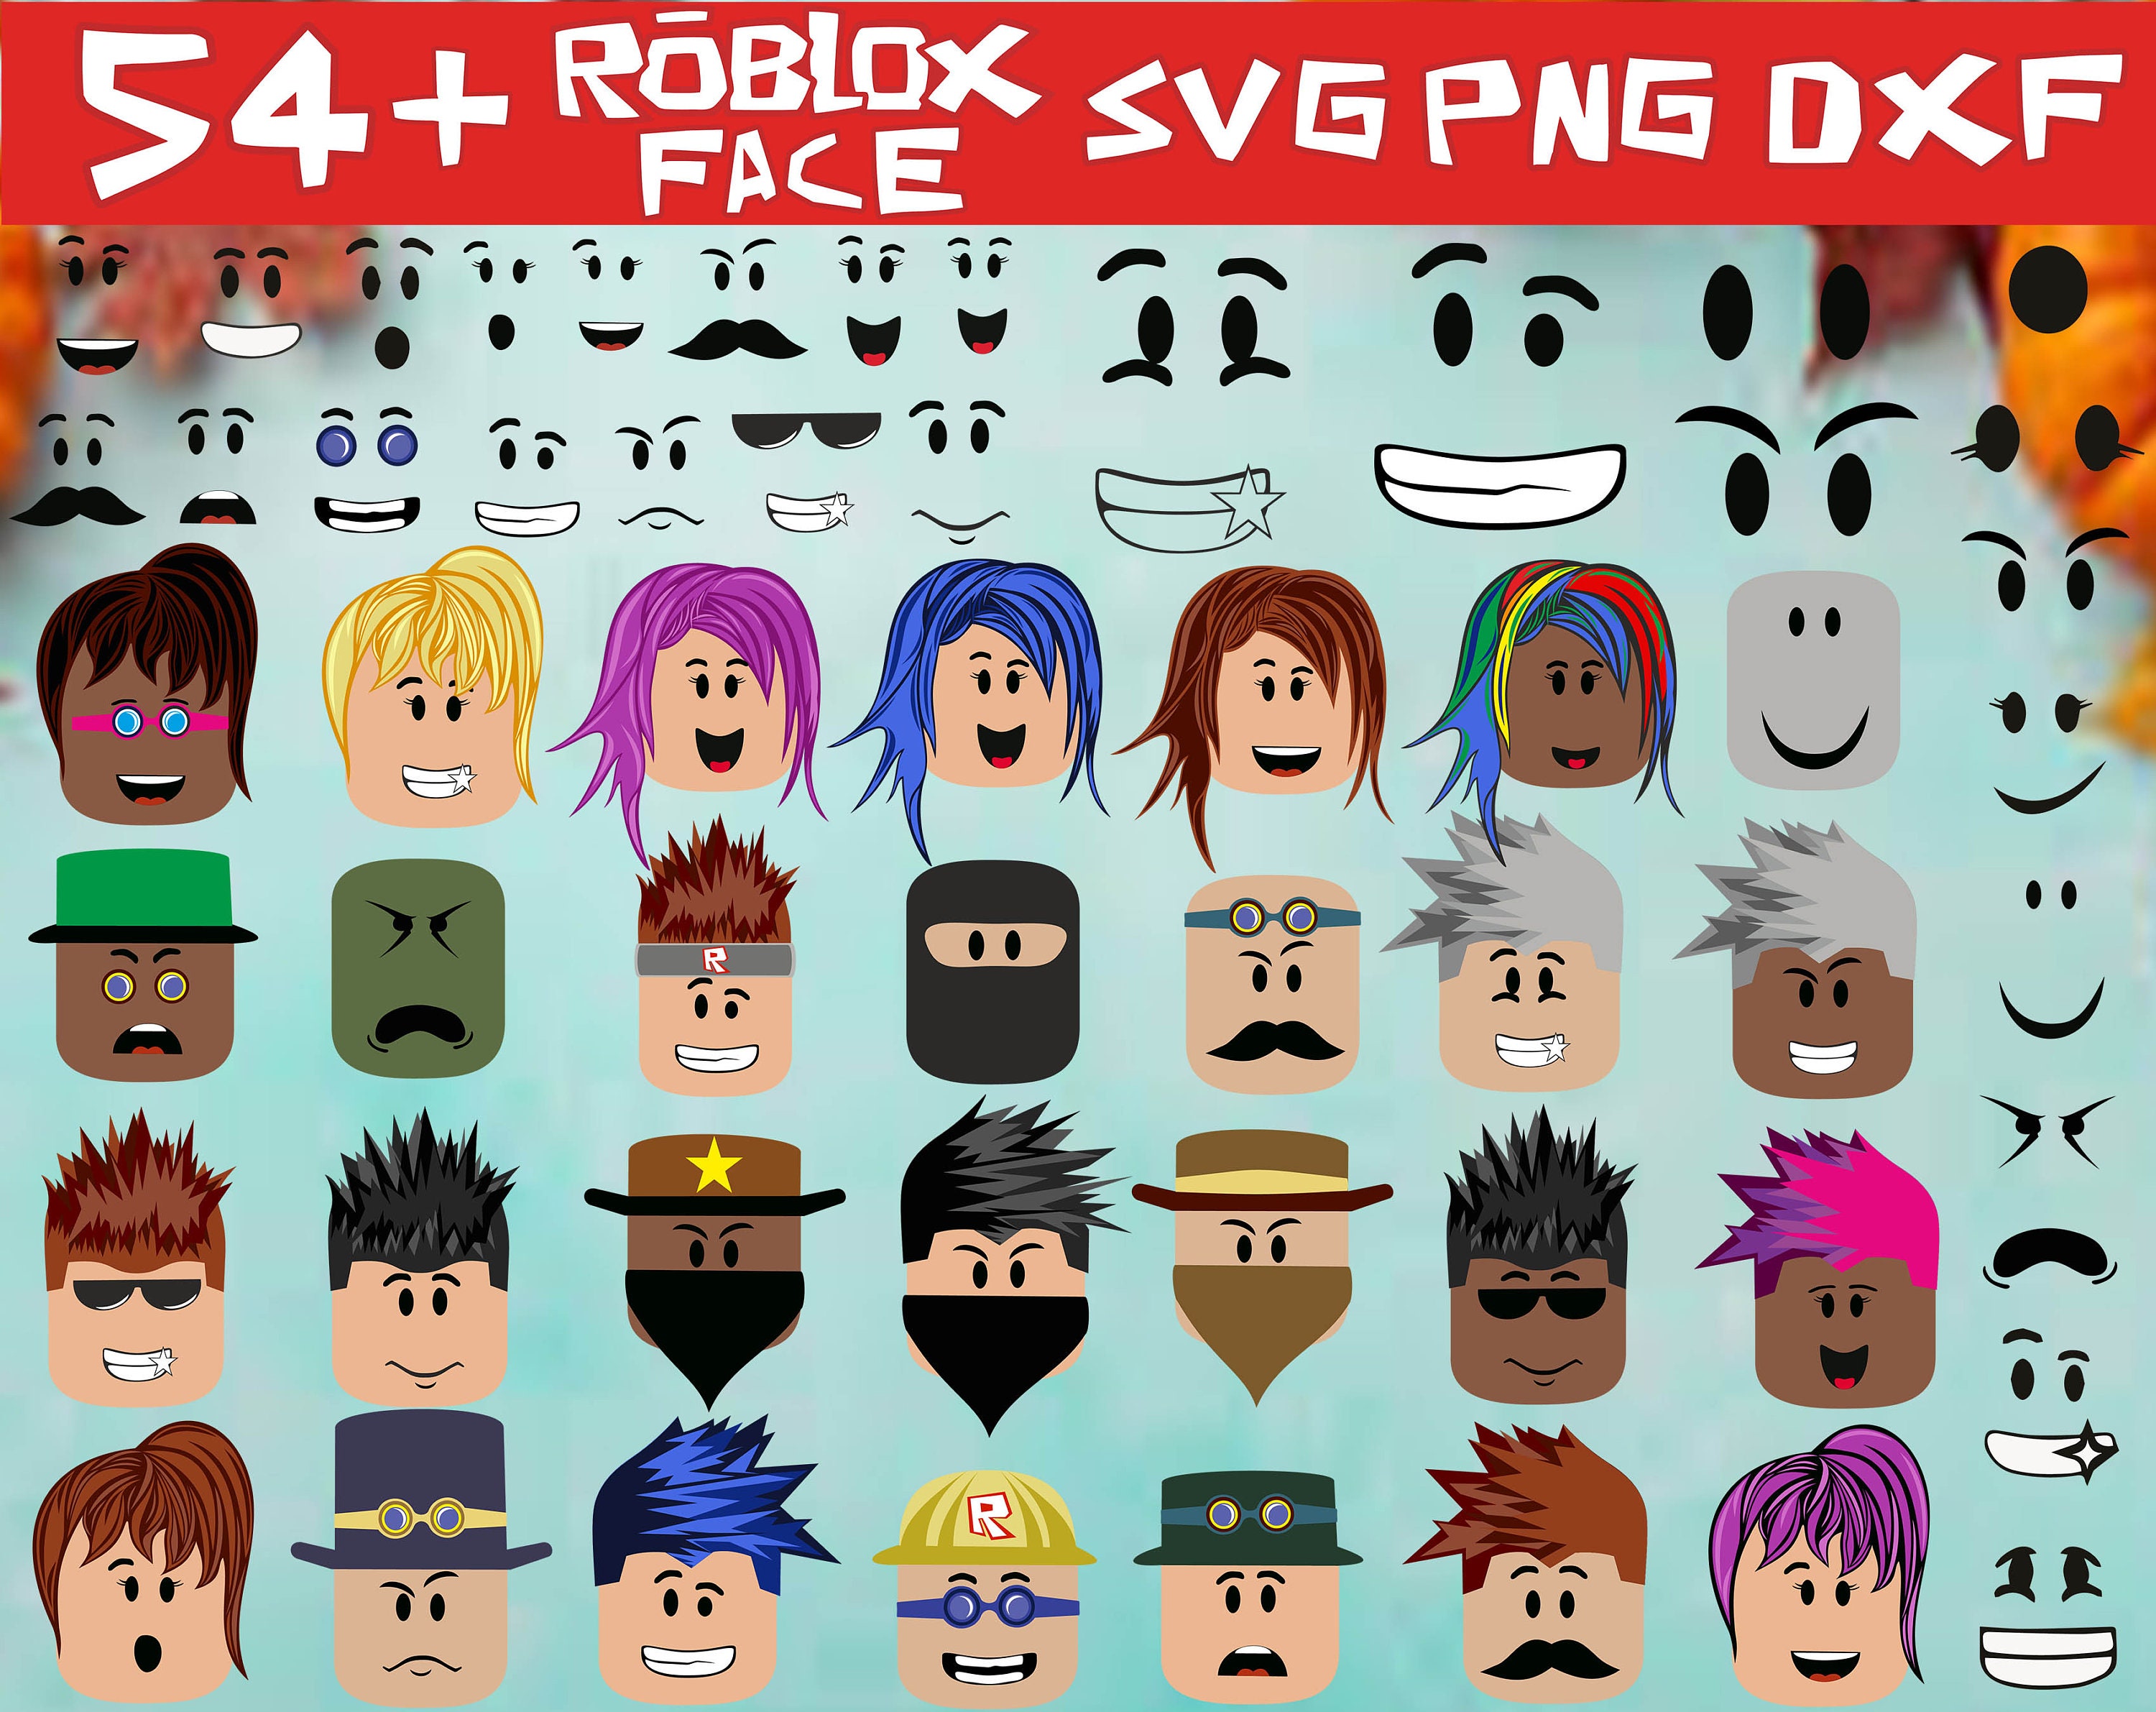 Download 54 Roblox Face svg Bundle Roblox svg png dxf Roblox face | Etsy